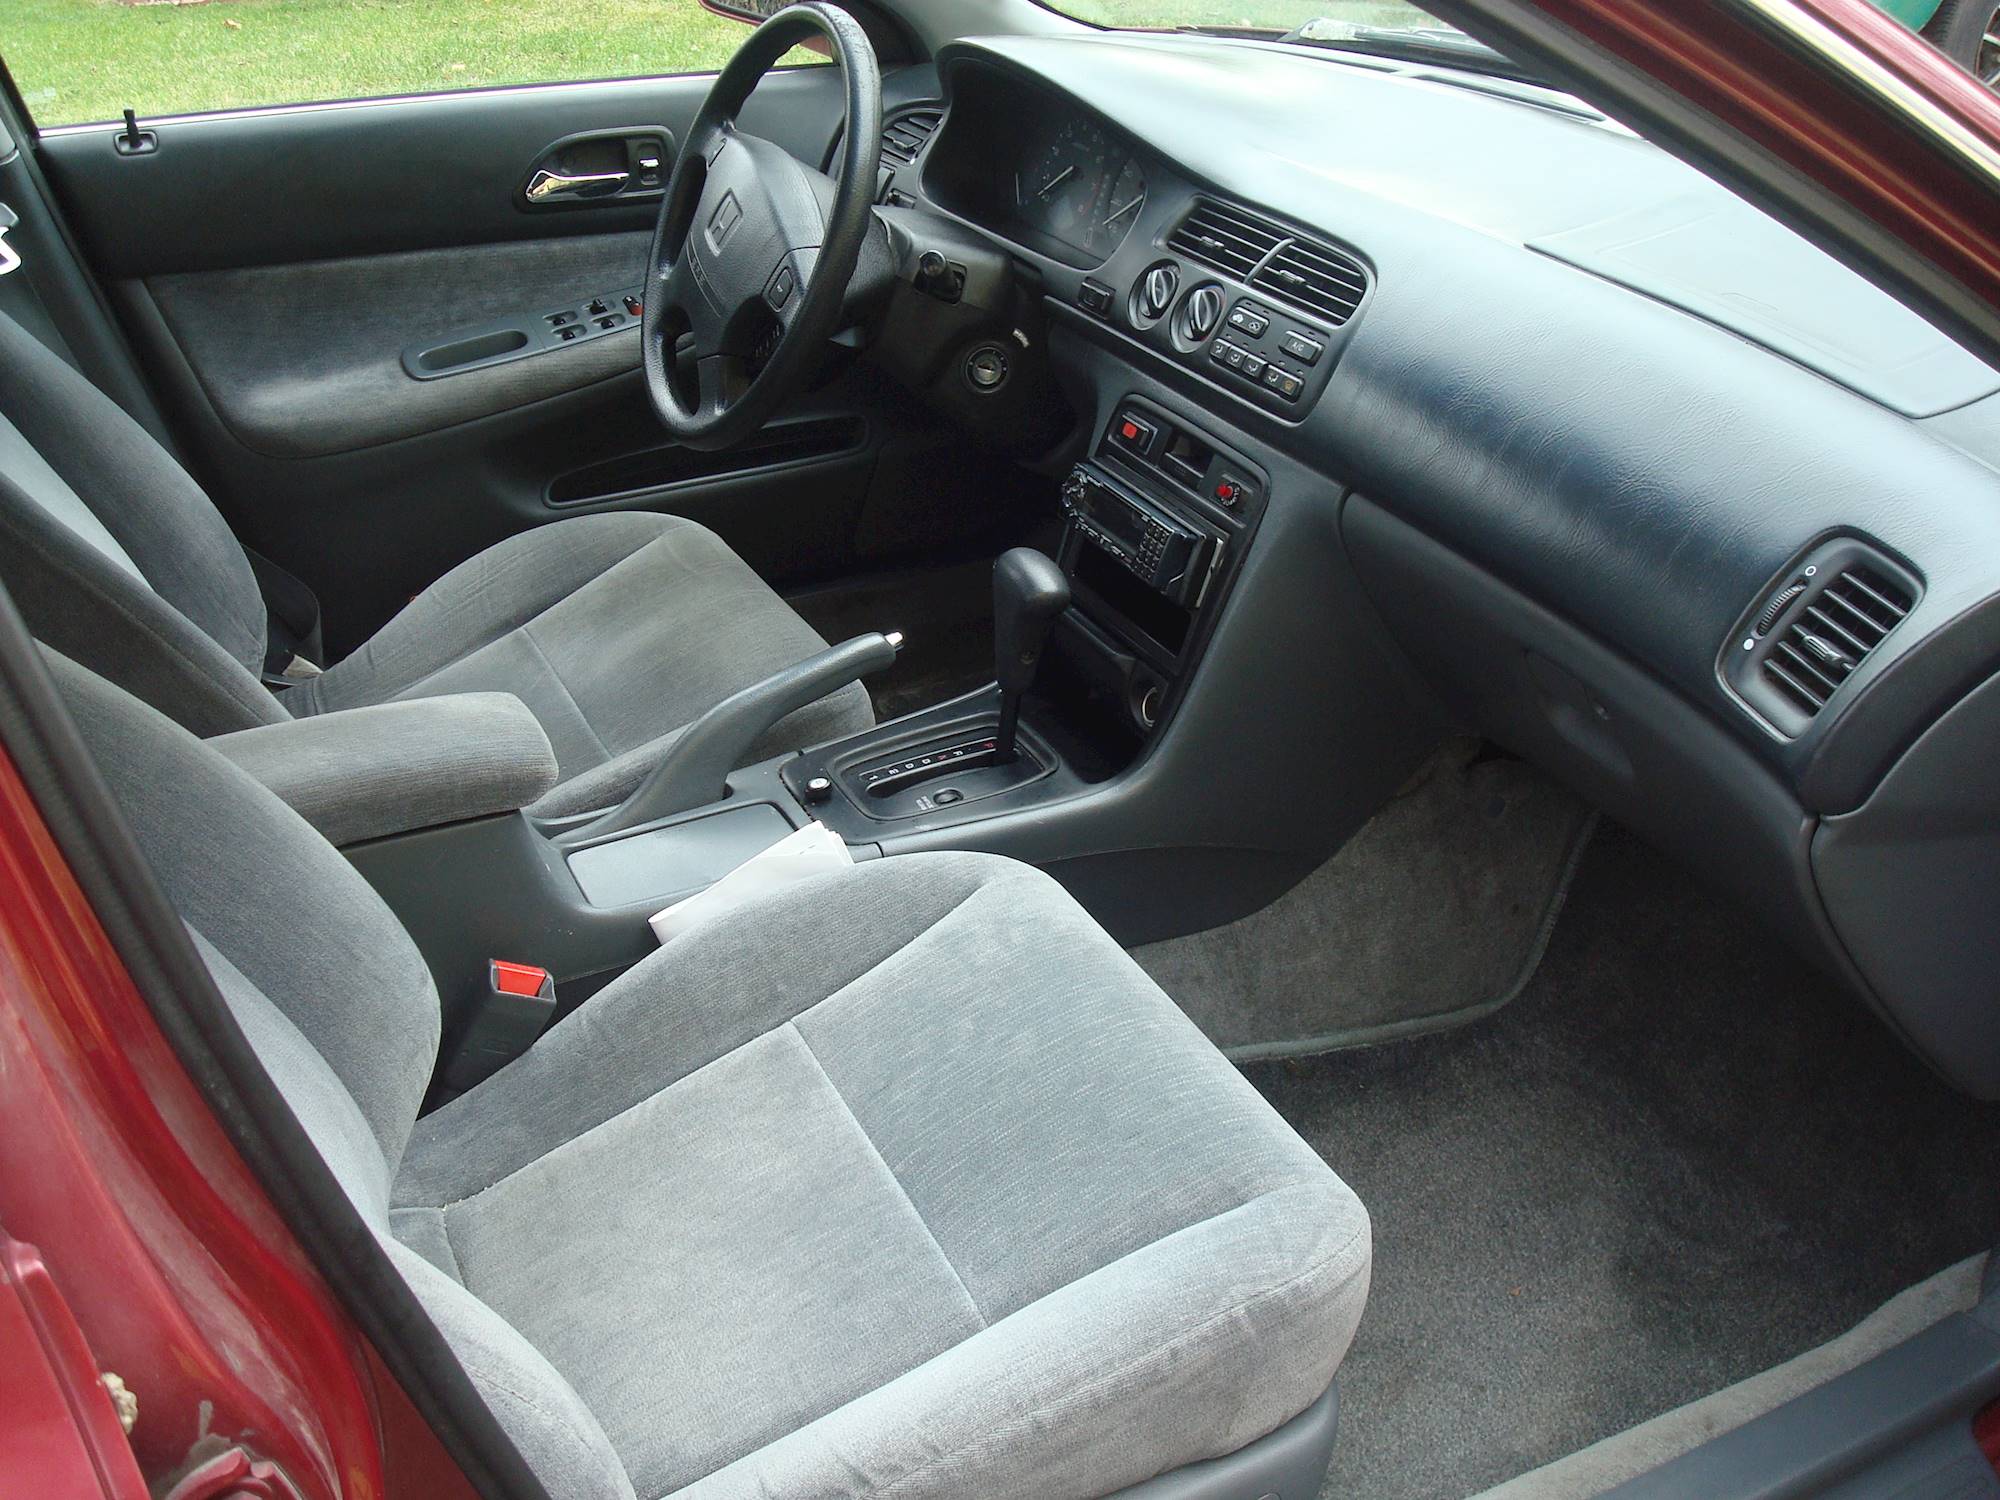 1999 Honda Accord Coupe 2-Door Coupe LX Manual